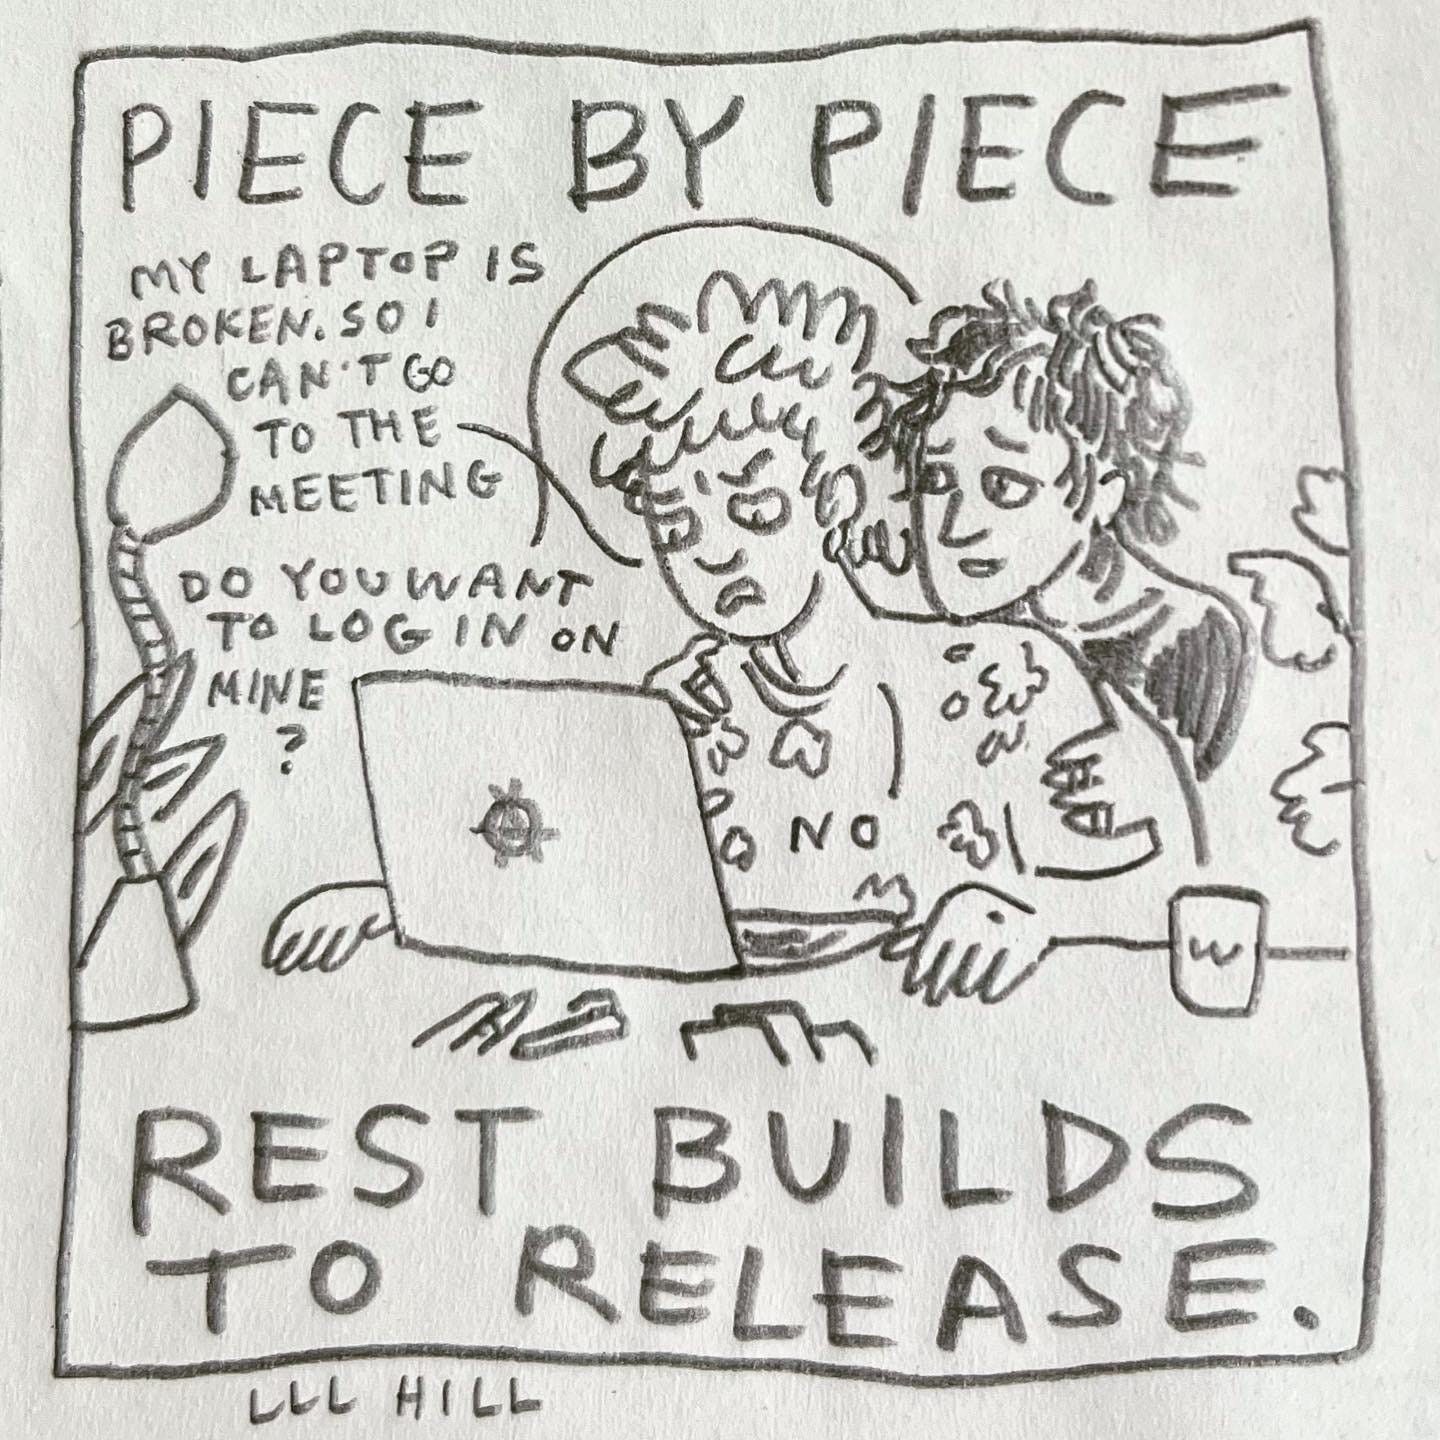 Panel 6: piece by piece rest builds to release Image: Lark is at the desk again on their laptop. Their lover, with short curly dark hair and rings on their fingers, hold their upper arms and leans over their shoulder. Lark frowns, saying "my laptop is broken. So I can't go to the meeting.” Their lover asks “do you want to log in on mine?" Lark replies "no"